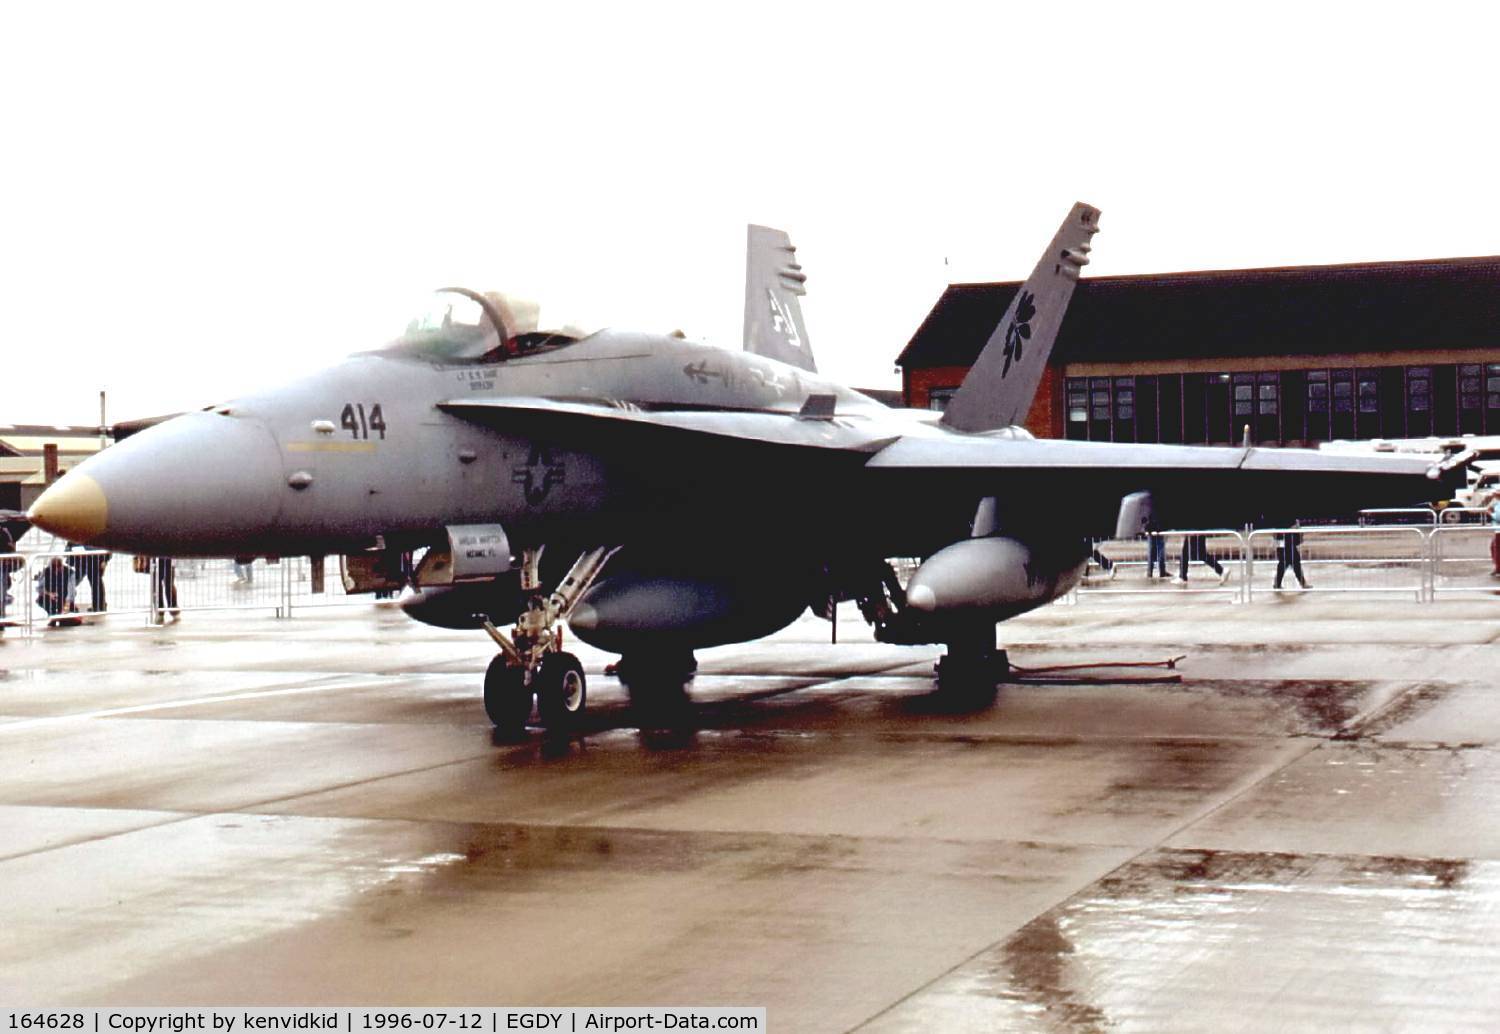 164628, 1991 McDonnell Douglas F/A-18C Hornet C/N 1045/C257, At the 1996 photocall prior to the Yeovilton Air Show.